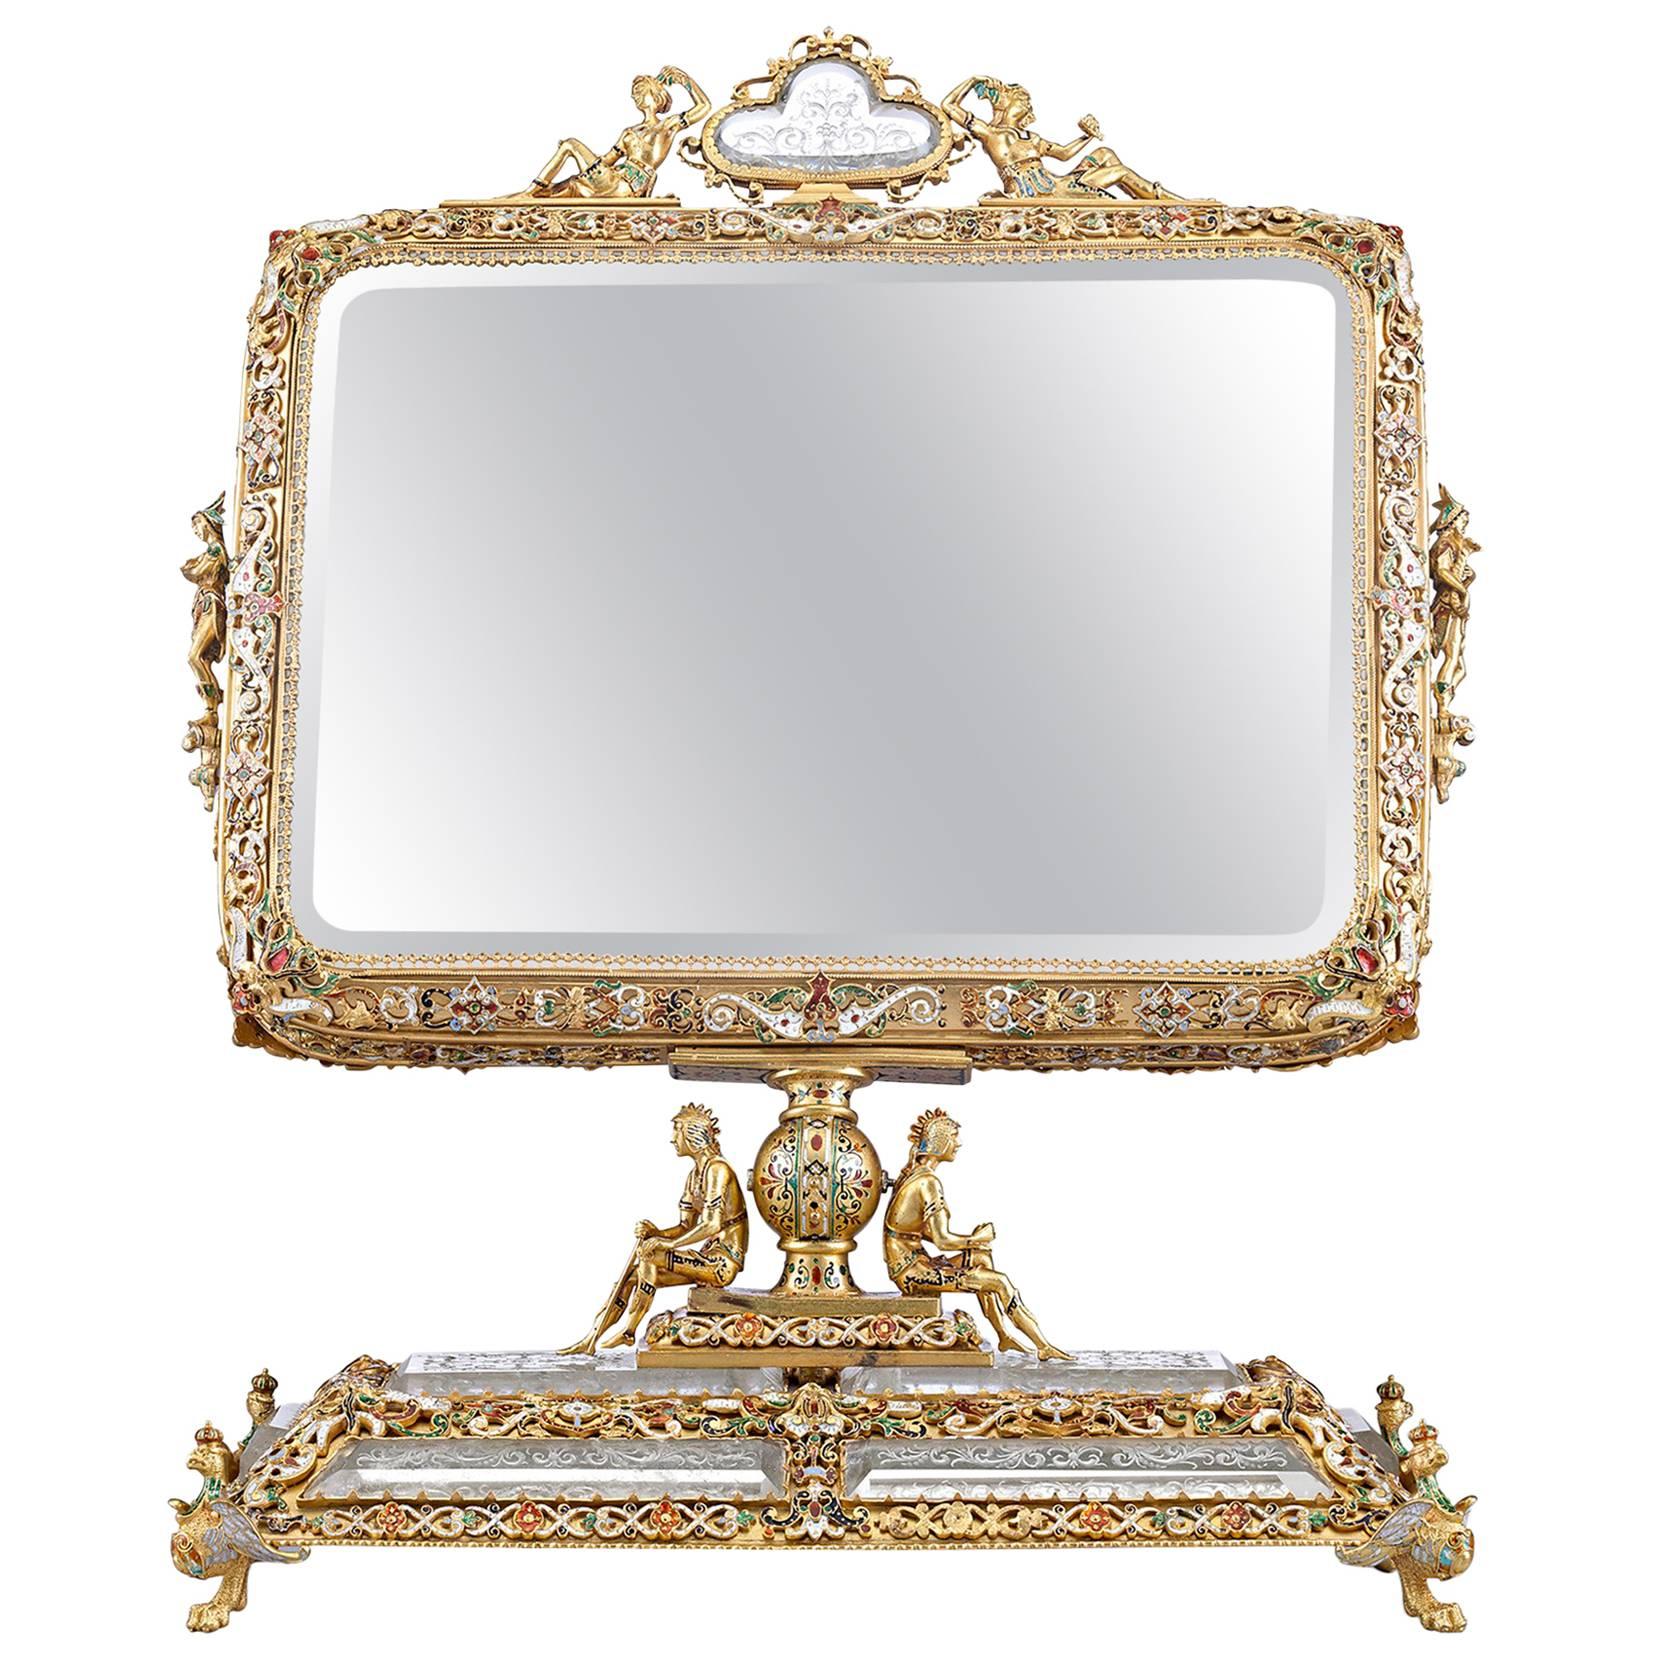 19th Century Viennese Rock Crystal and Silver Gilt Mirror 